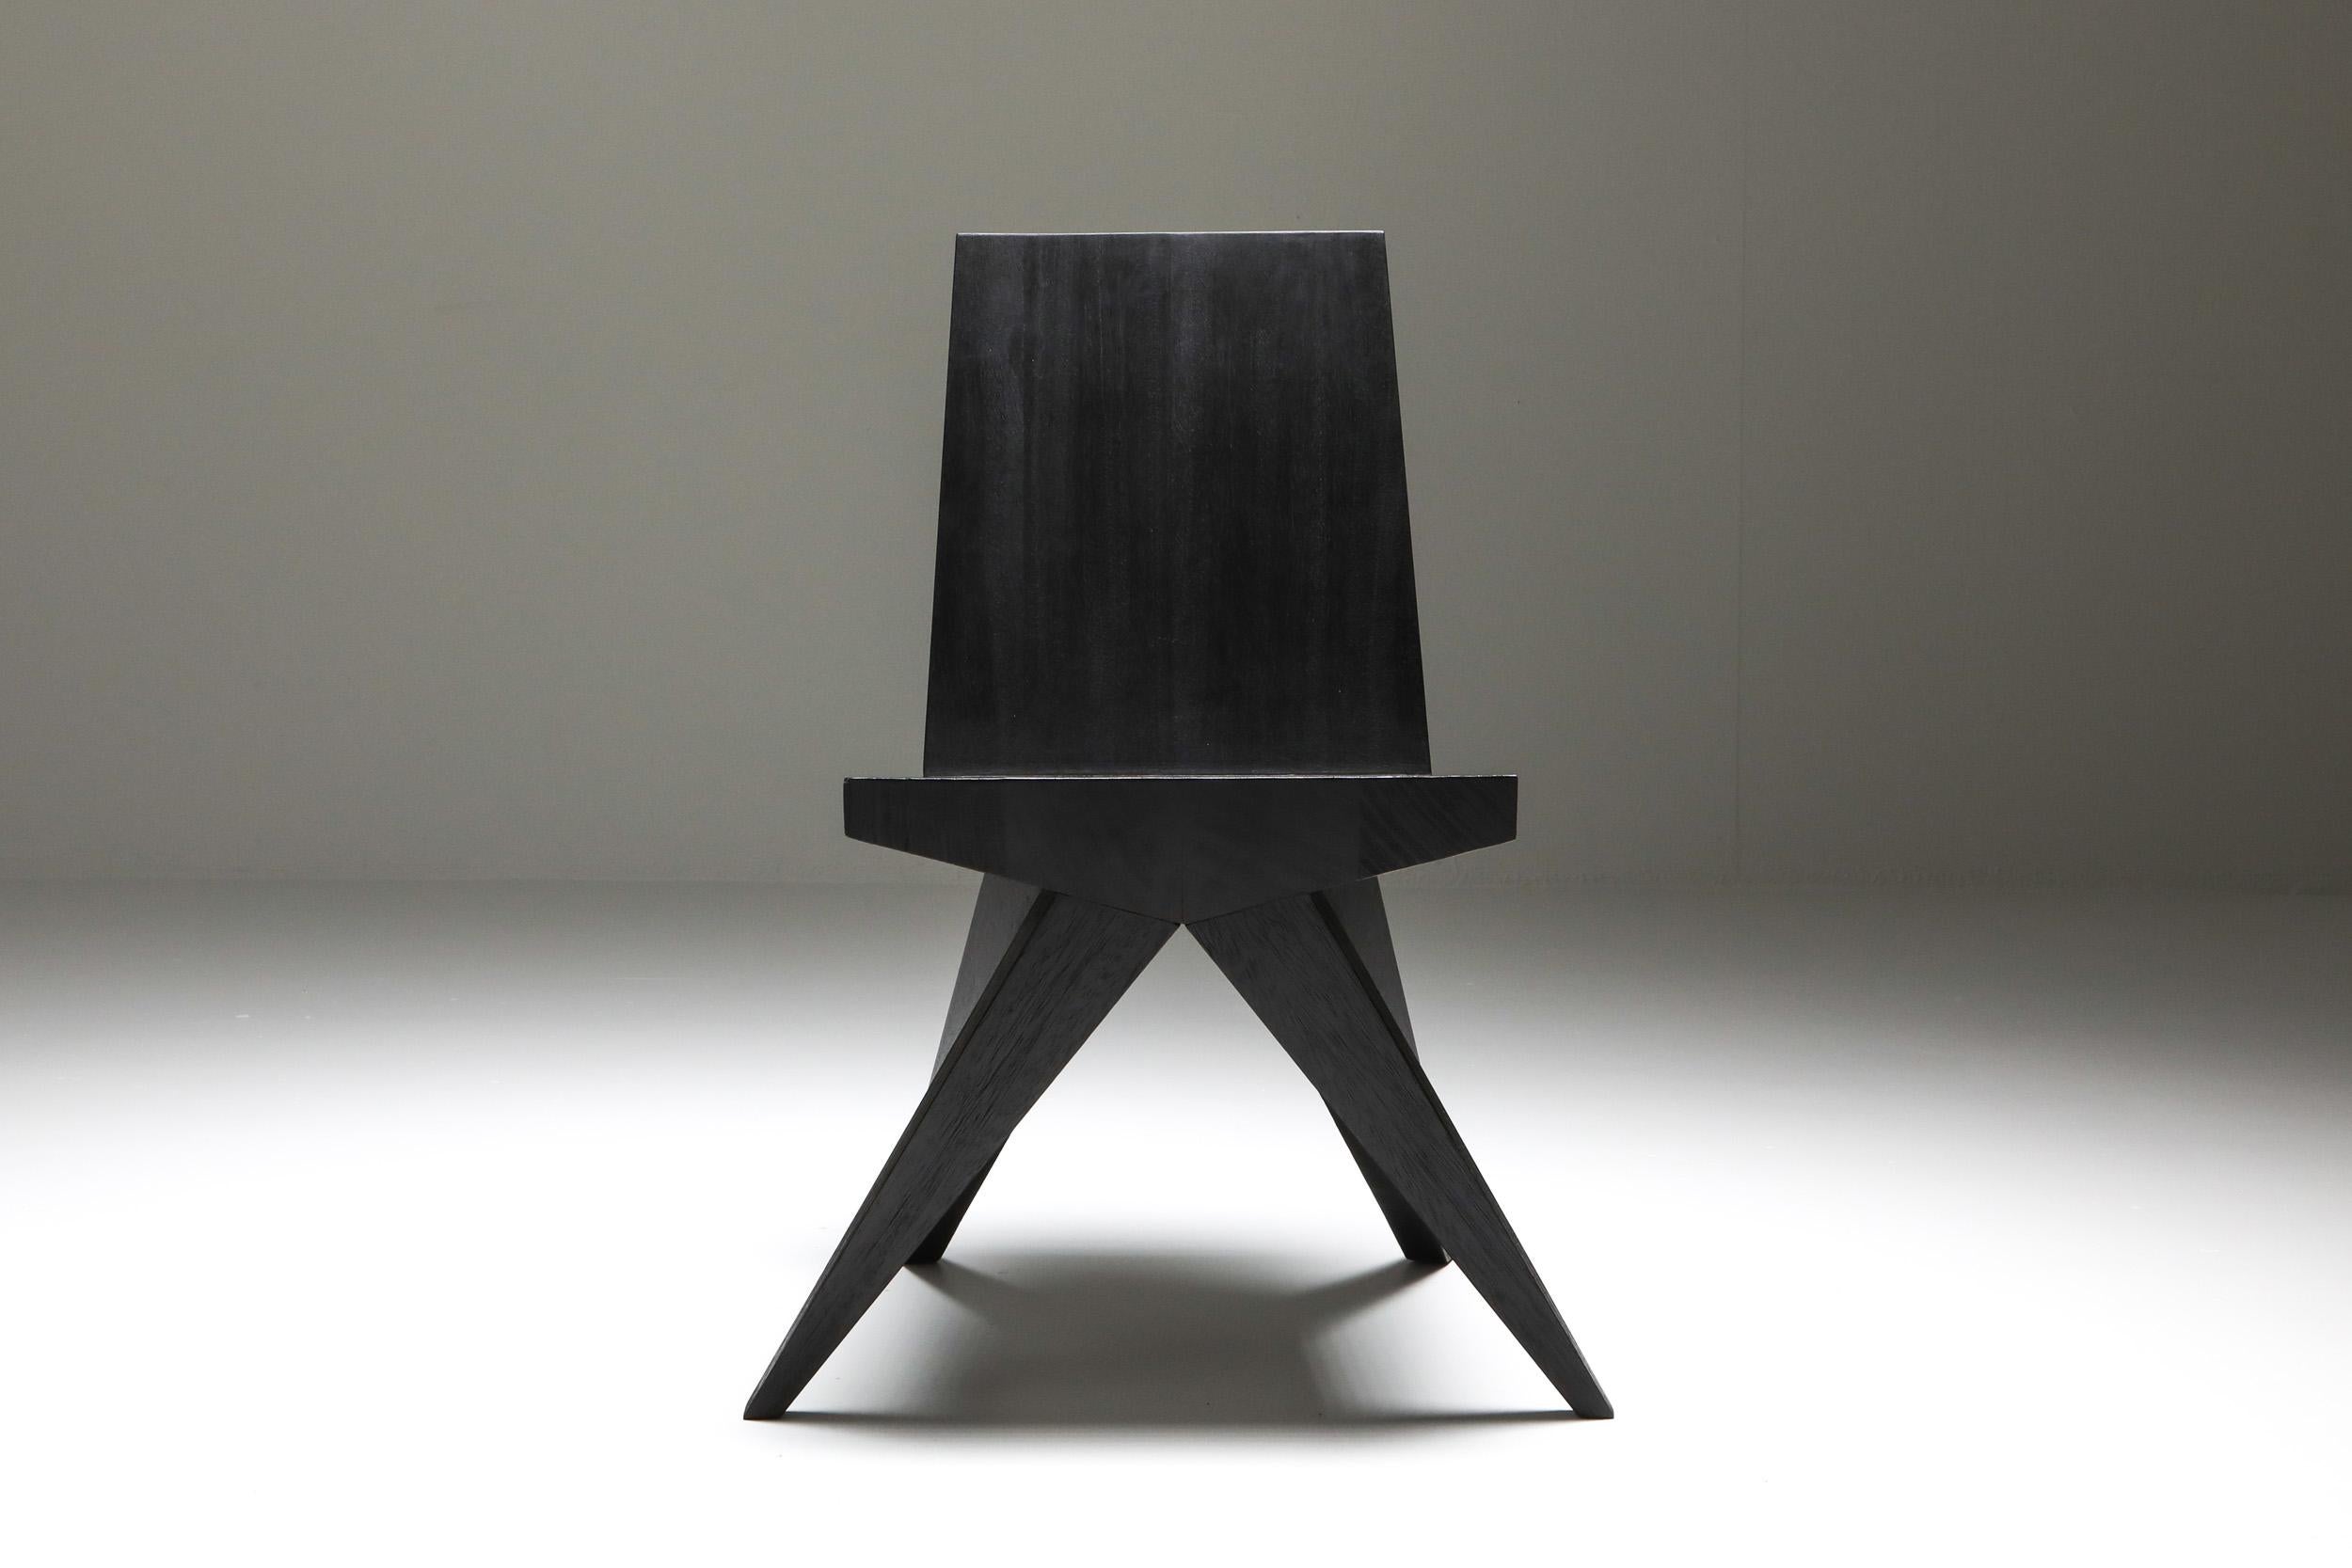 V-dining chair
Burnished and waxed Iroko wood. 

Black furniture, burnt
Fits well in an African modernist or Rick Owens inspired decor

Measures: 46 cm wide x 57 cm long x 81 cm high / 18” wide x 22,5” long x 32” high
Seat. 45cm high x 45 cm